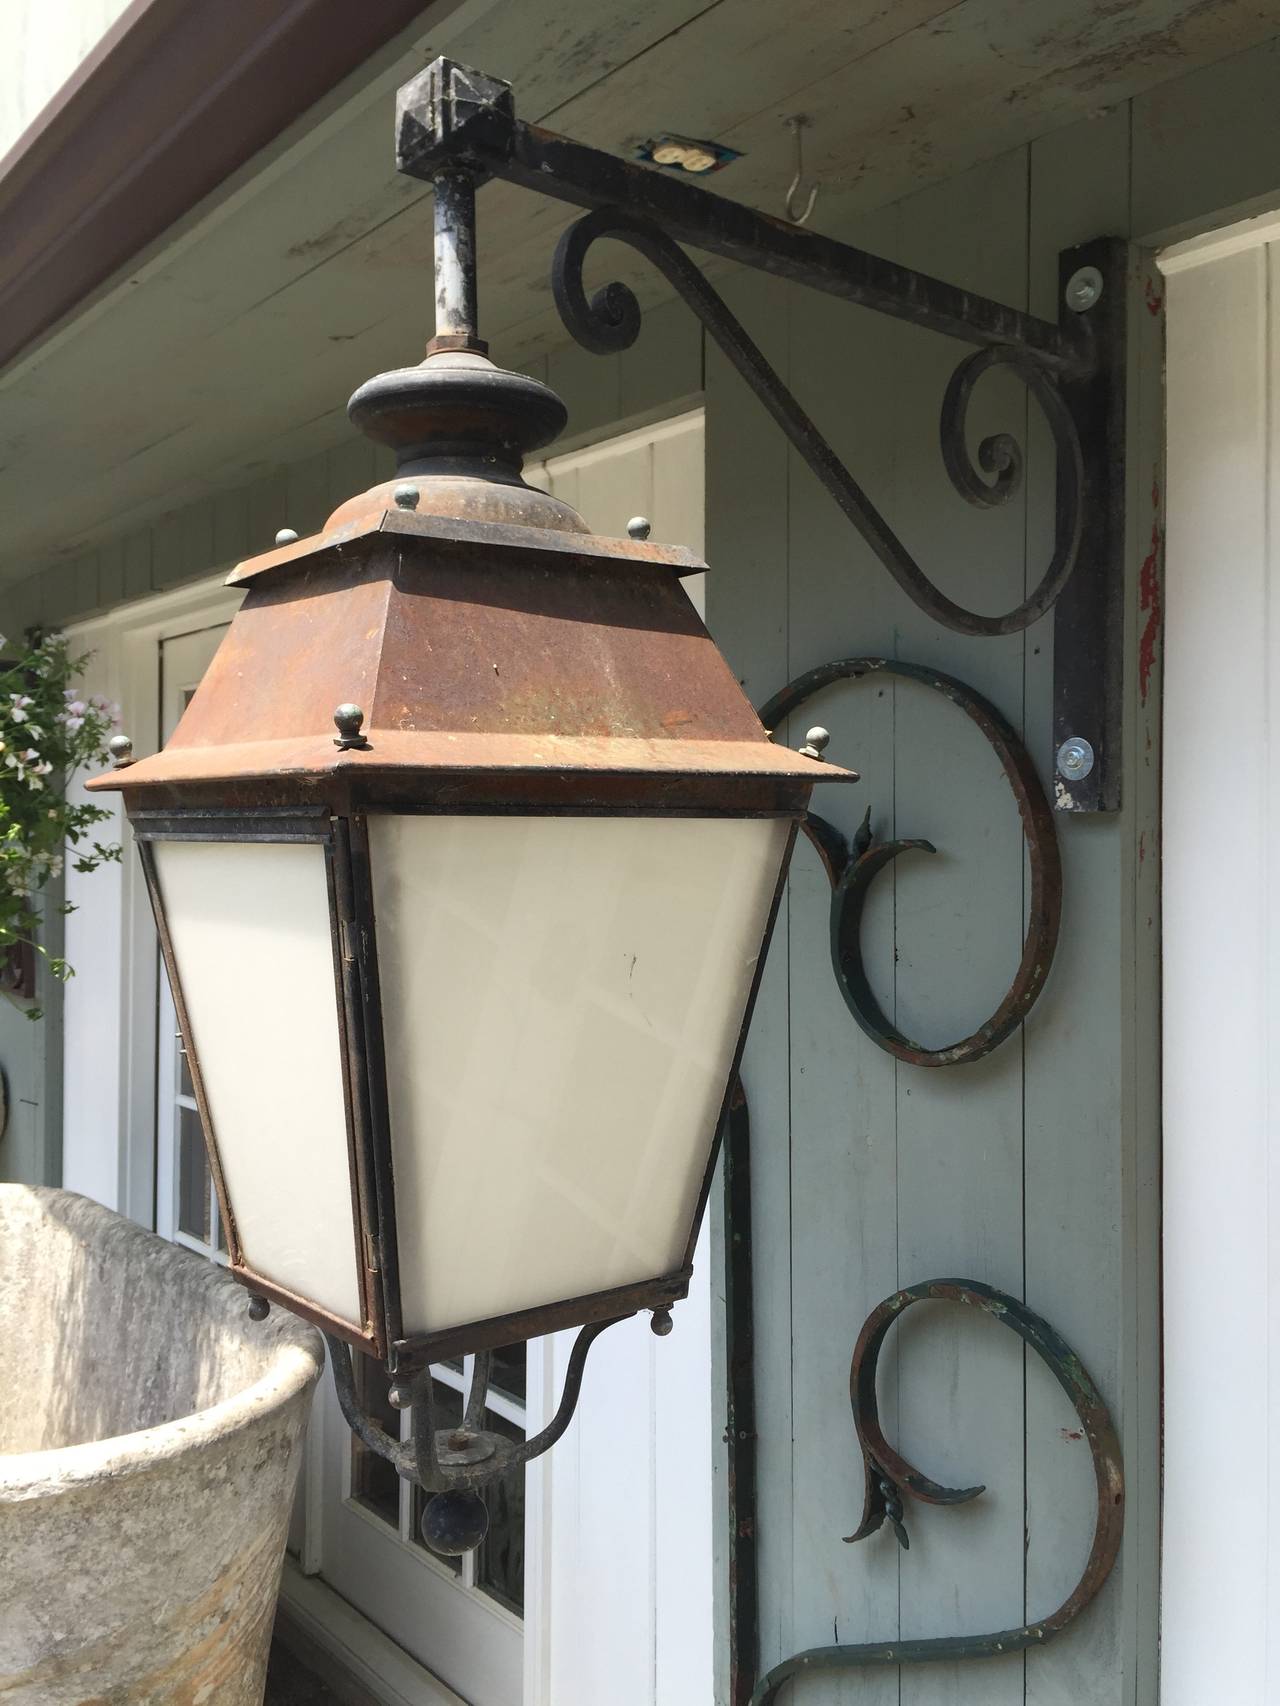 Simply classic! These French street lanterns are made of steel and feature their original bronze screws, brackets and decorative bottom finials. In all original condition each lantern has a single large bulb inside with translucent white plexiglass